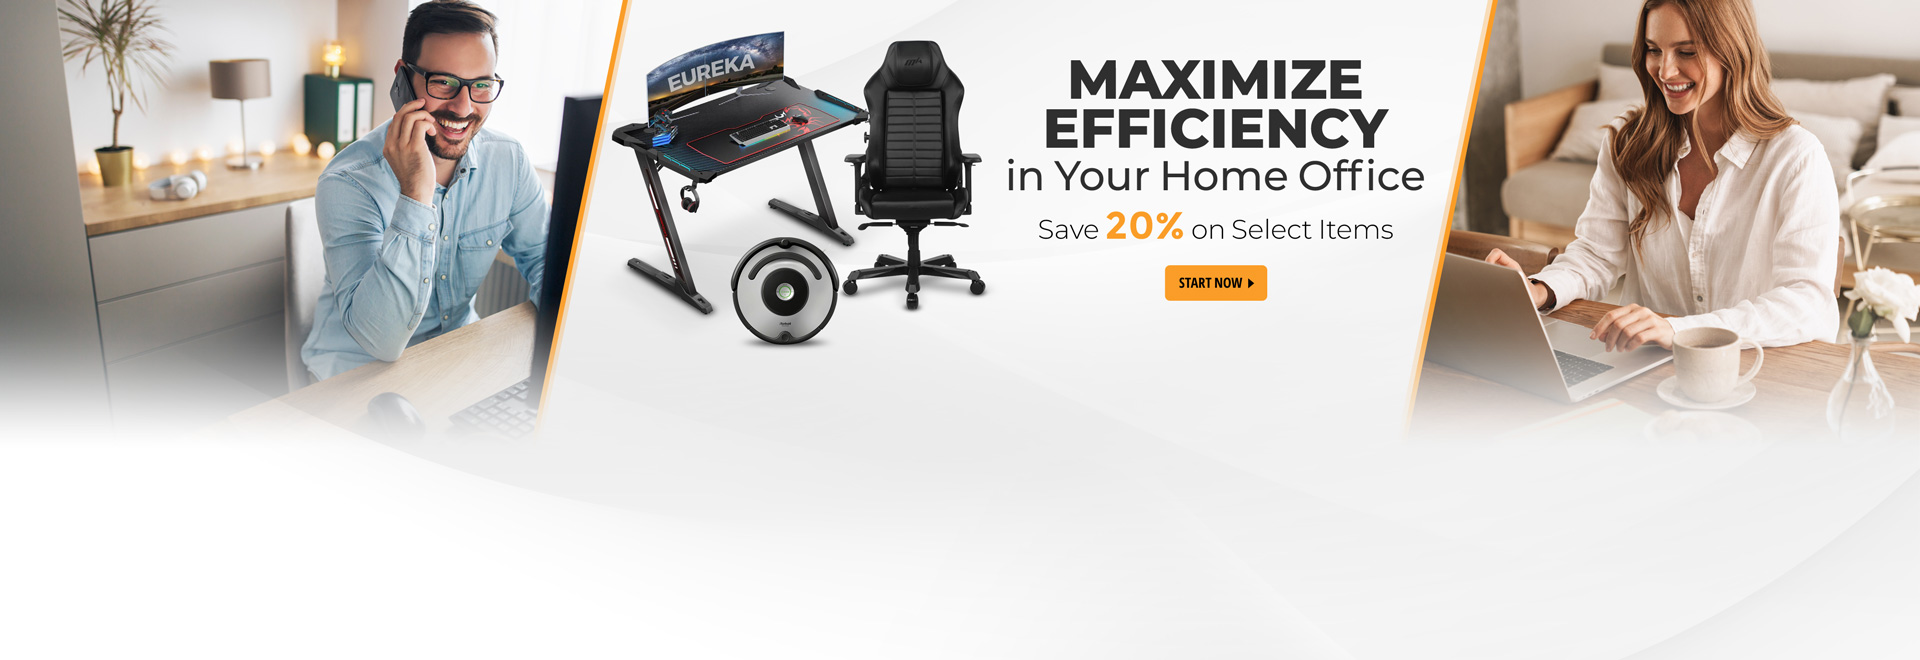 Maximize Efficiency in Your Home Office